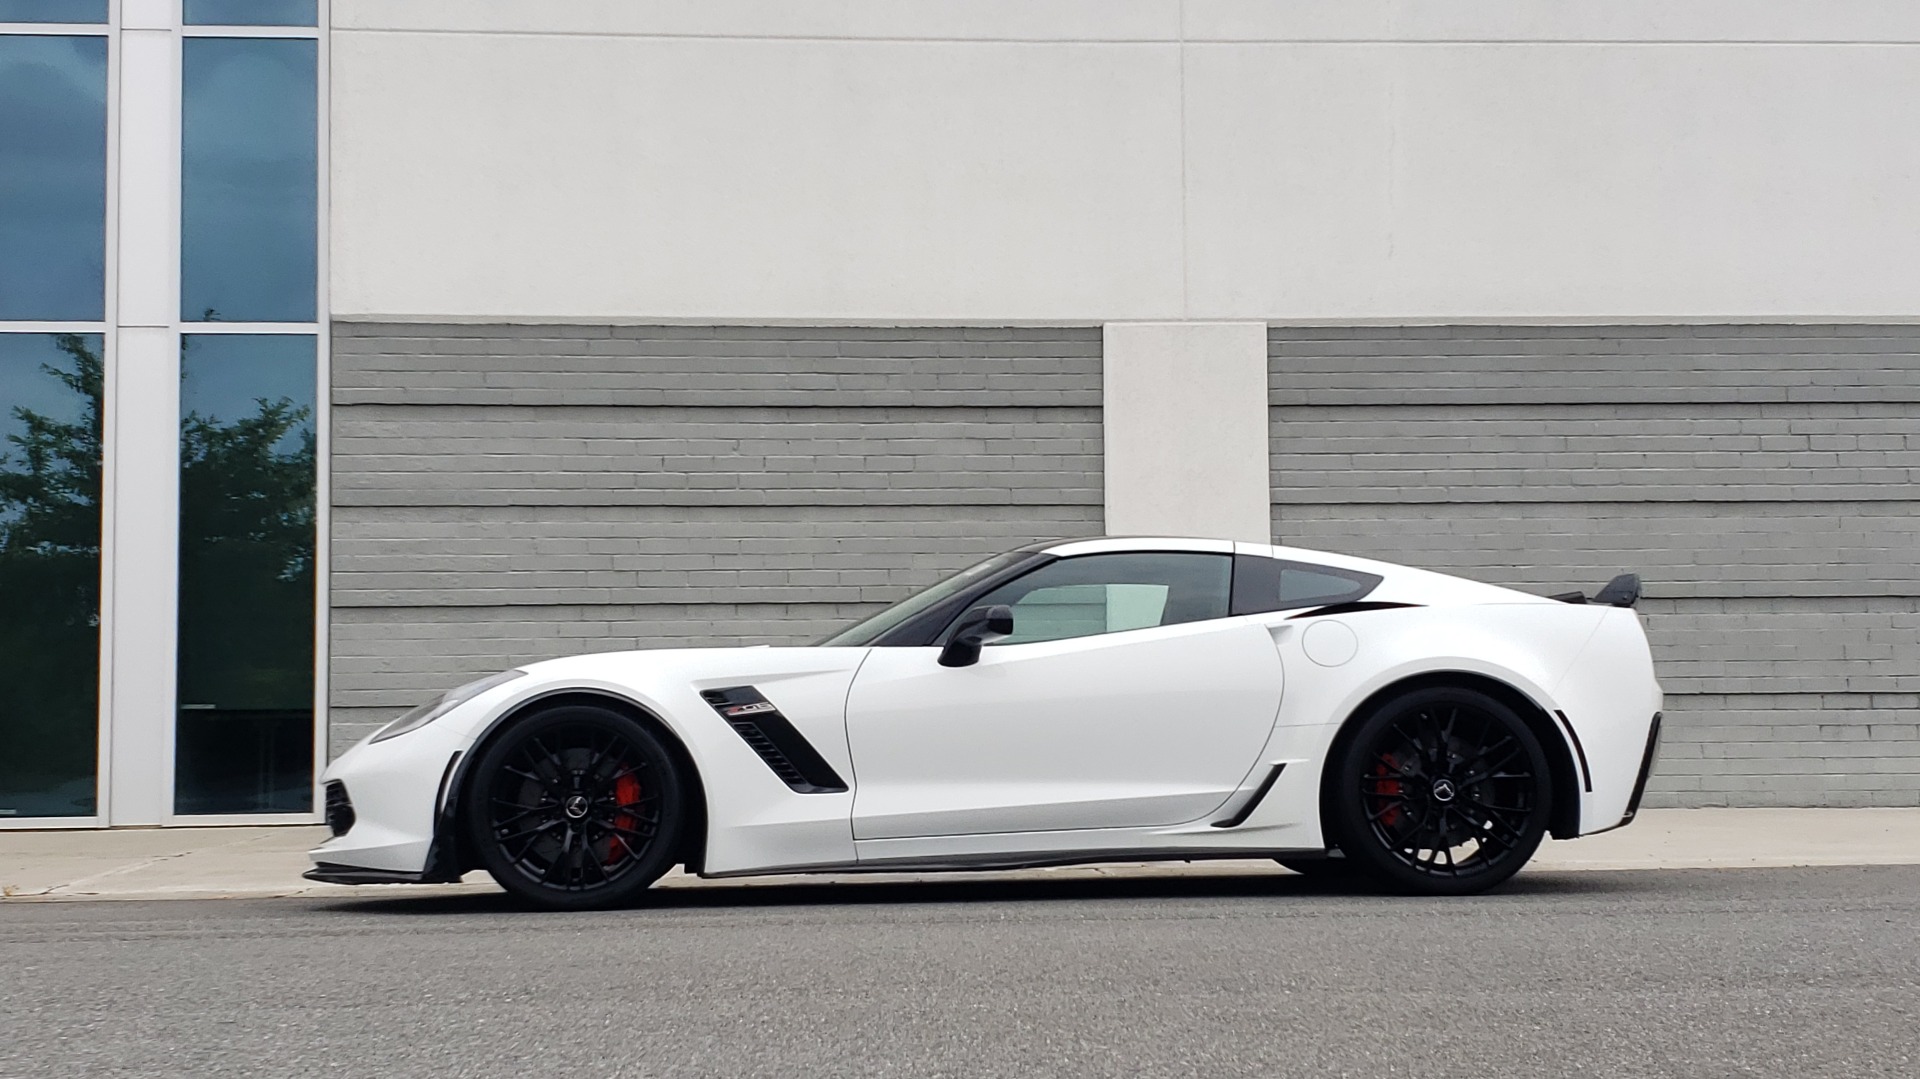 Used 2015 Chevrolet CORVETTE C7 Z06 3LZ COUPE / NAV / COMP STS / CF ROOF / REMOTE START / REARVIEW for sale Sold at Formula Imports in Charlotte NC 28227 4